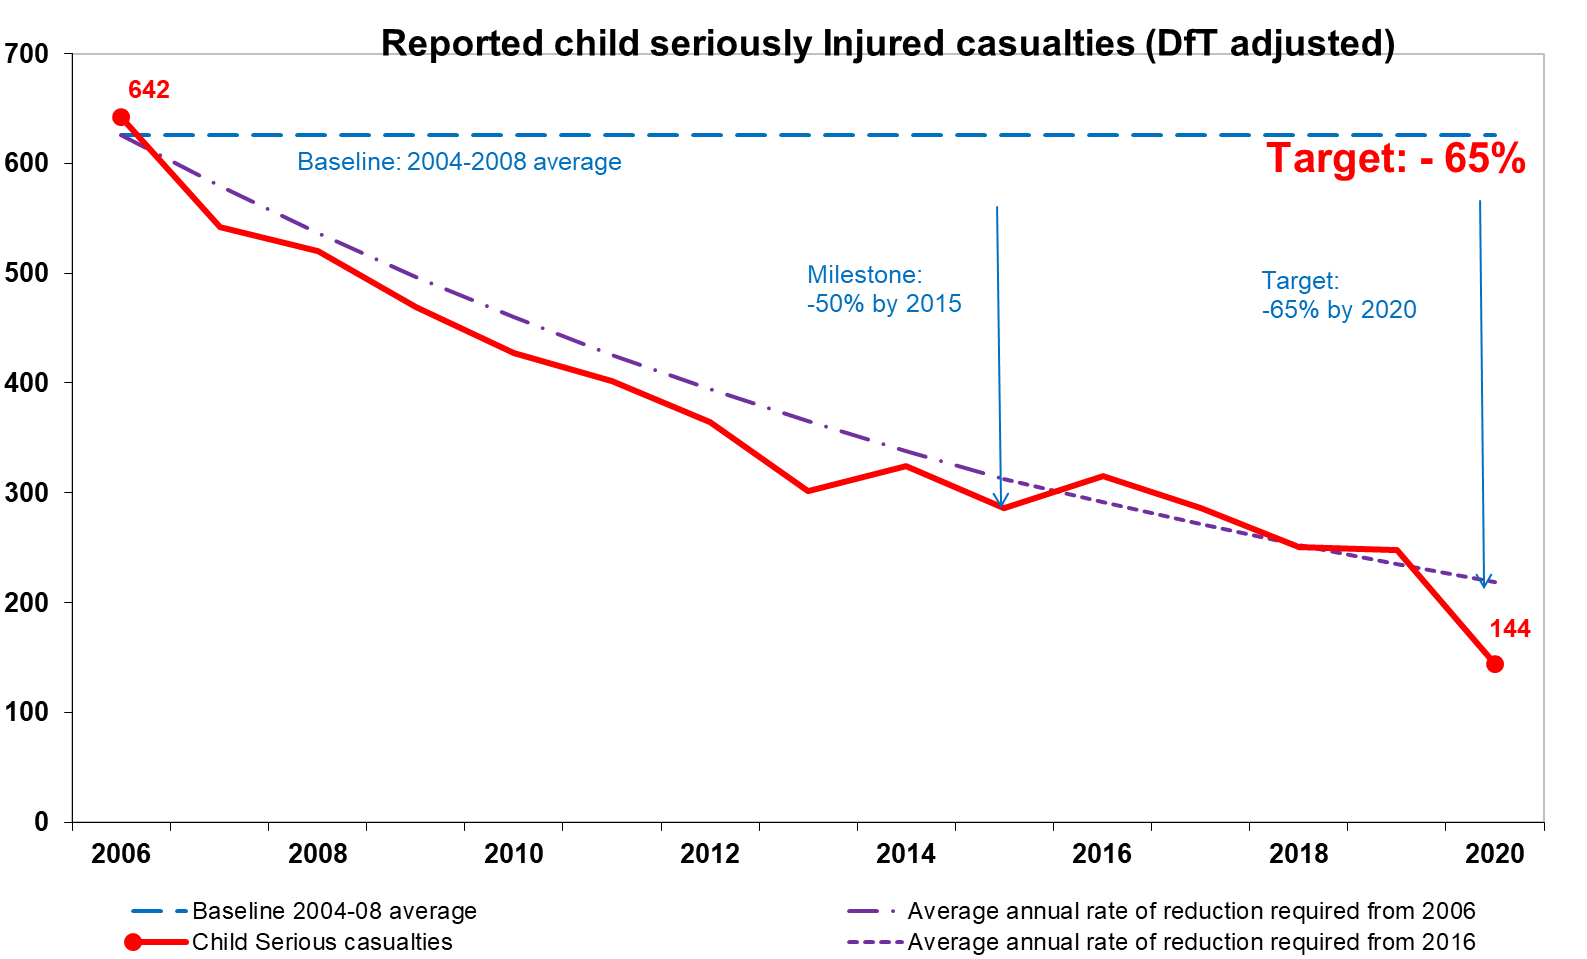 144 children were reported as seriously injured in 2020, 77 per cent (482) below the 2004-2008 average of 626. Figure 6 shows that the decrease has exceeded the framework target for 2020 (a reduction of 65% from 2004-08). Prior to the casualty reductions in 2020, Scotland had seen significant reductions but was not on track to meet the target. The reduction achieved in 2020 compared to previous years should be seen in the wider context of lower level of road traffic in Scotland in 2020 due to the Covid-19 pandemic.